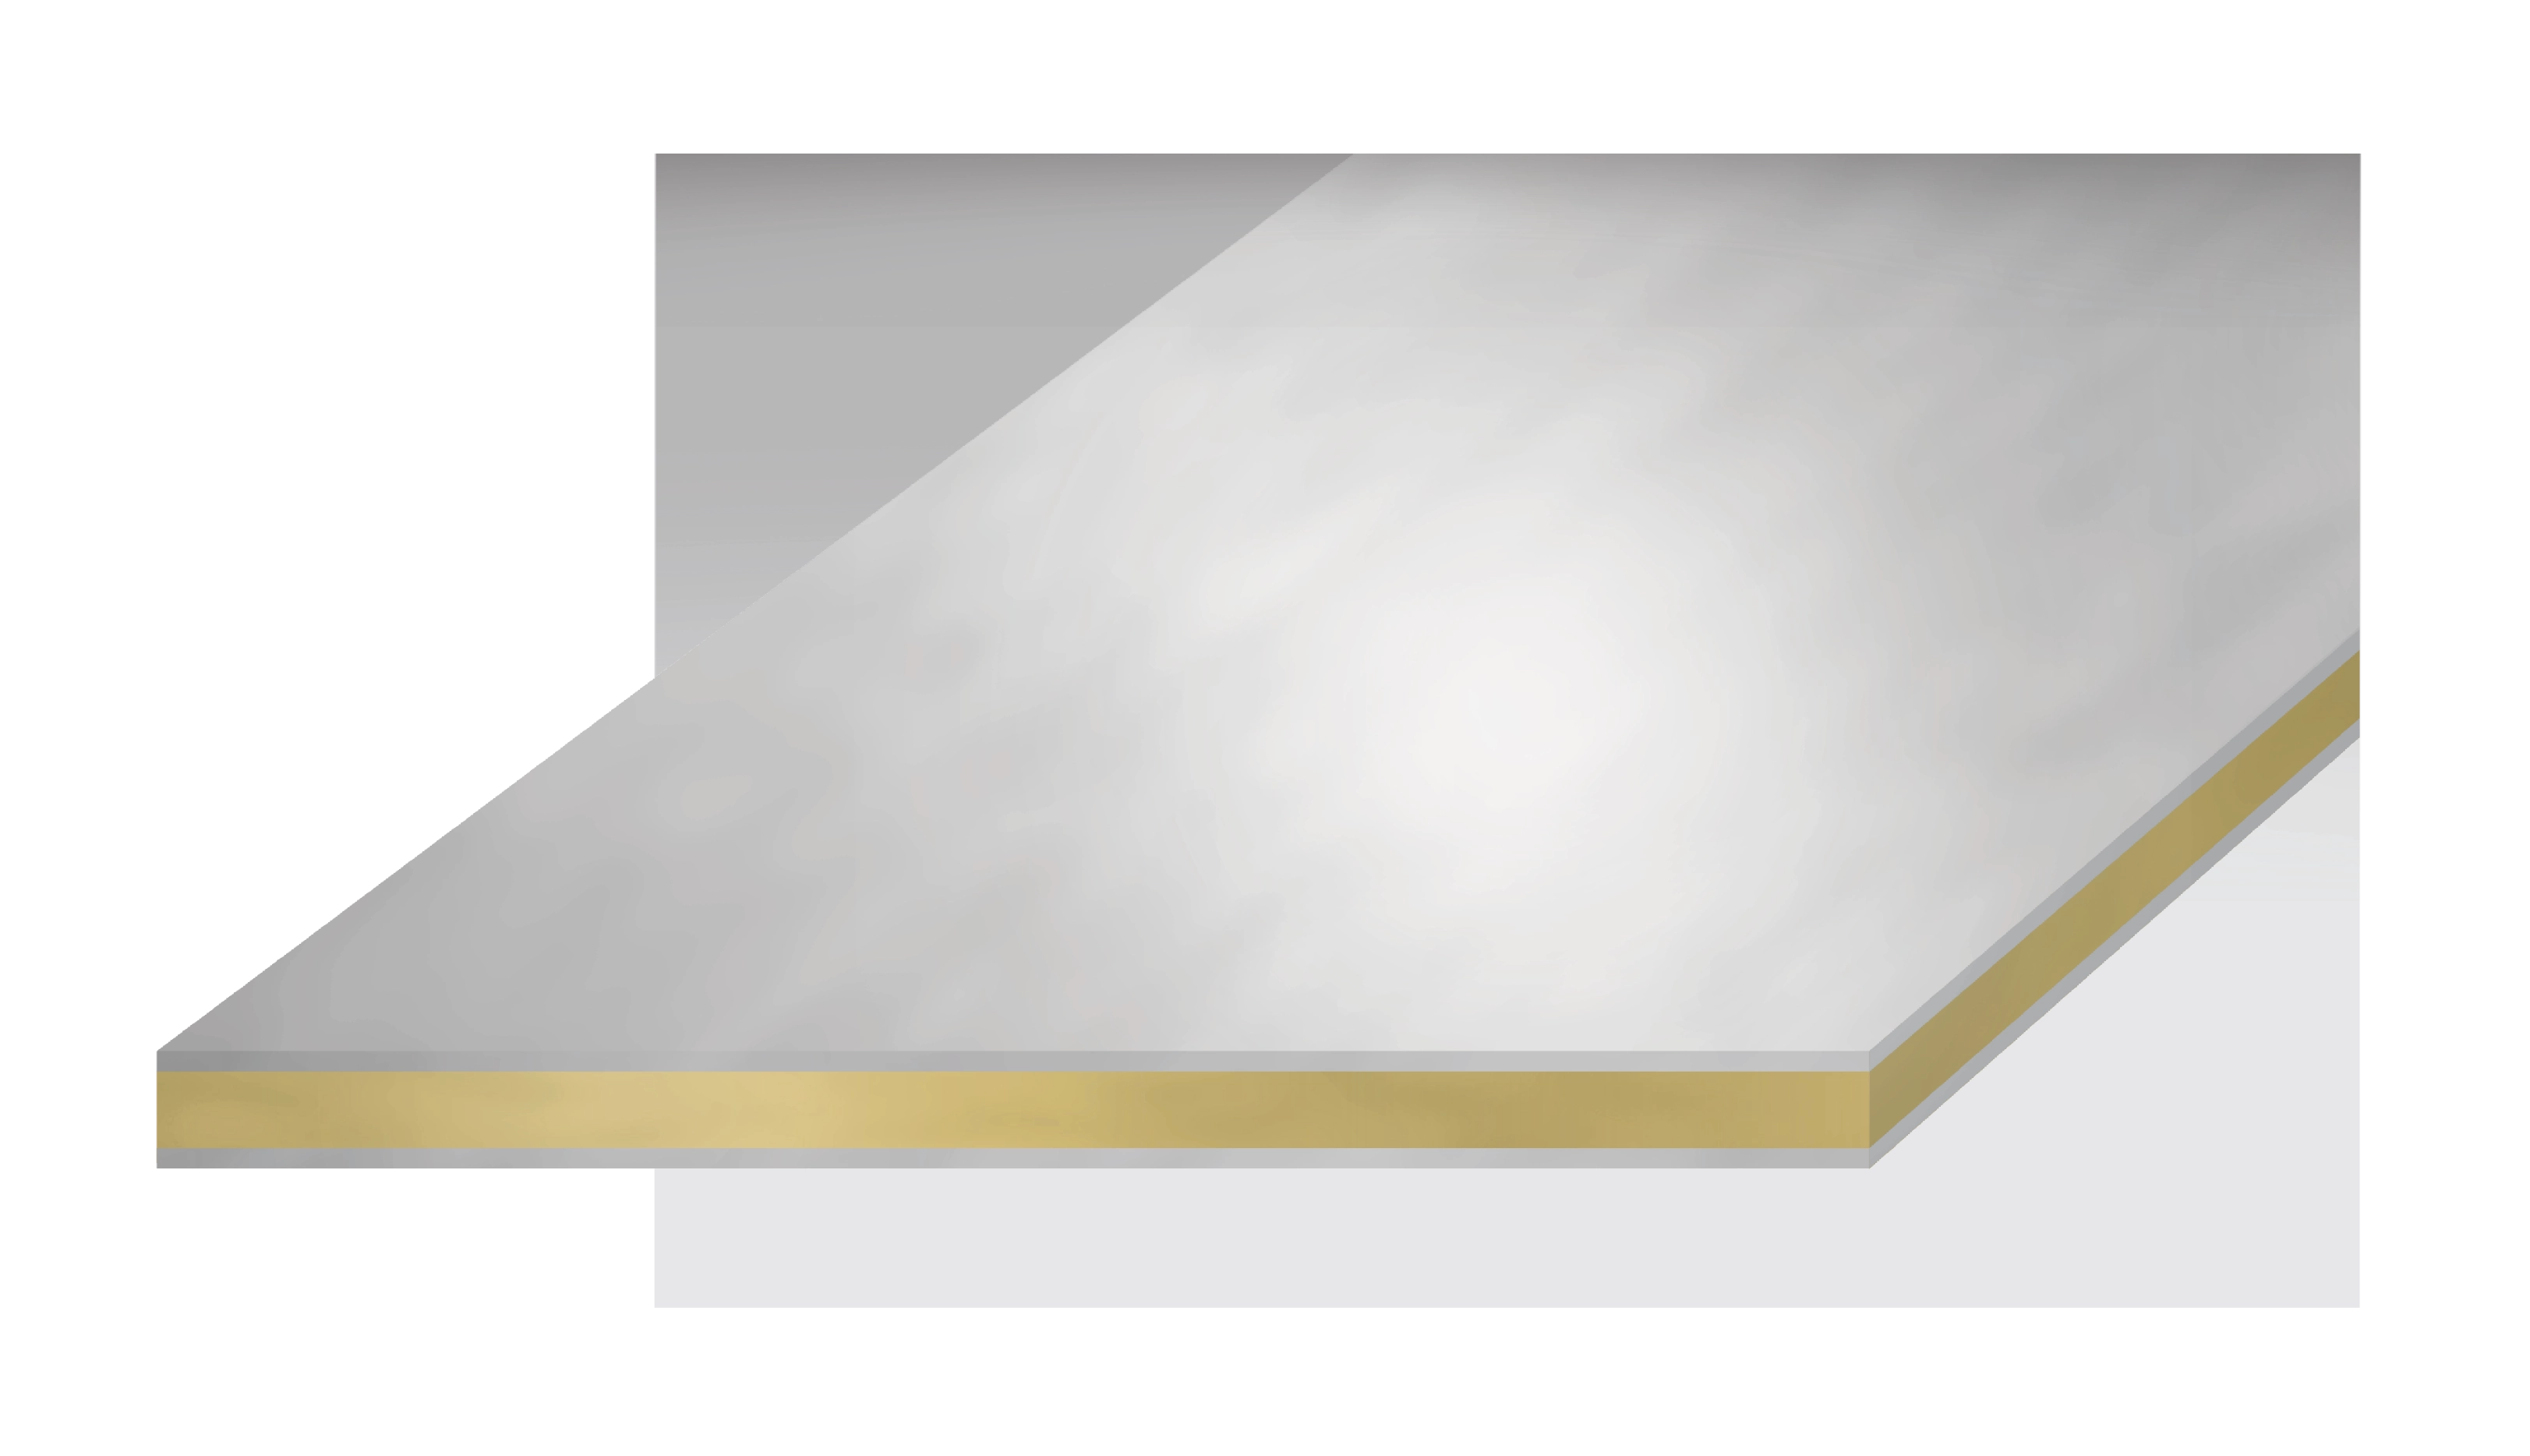 Illustration of eStainless clad material with copper